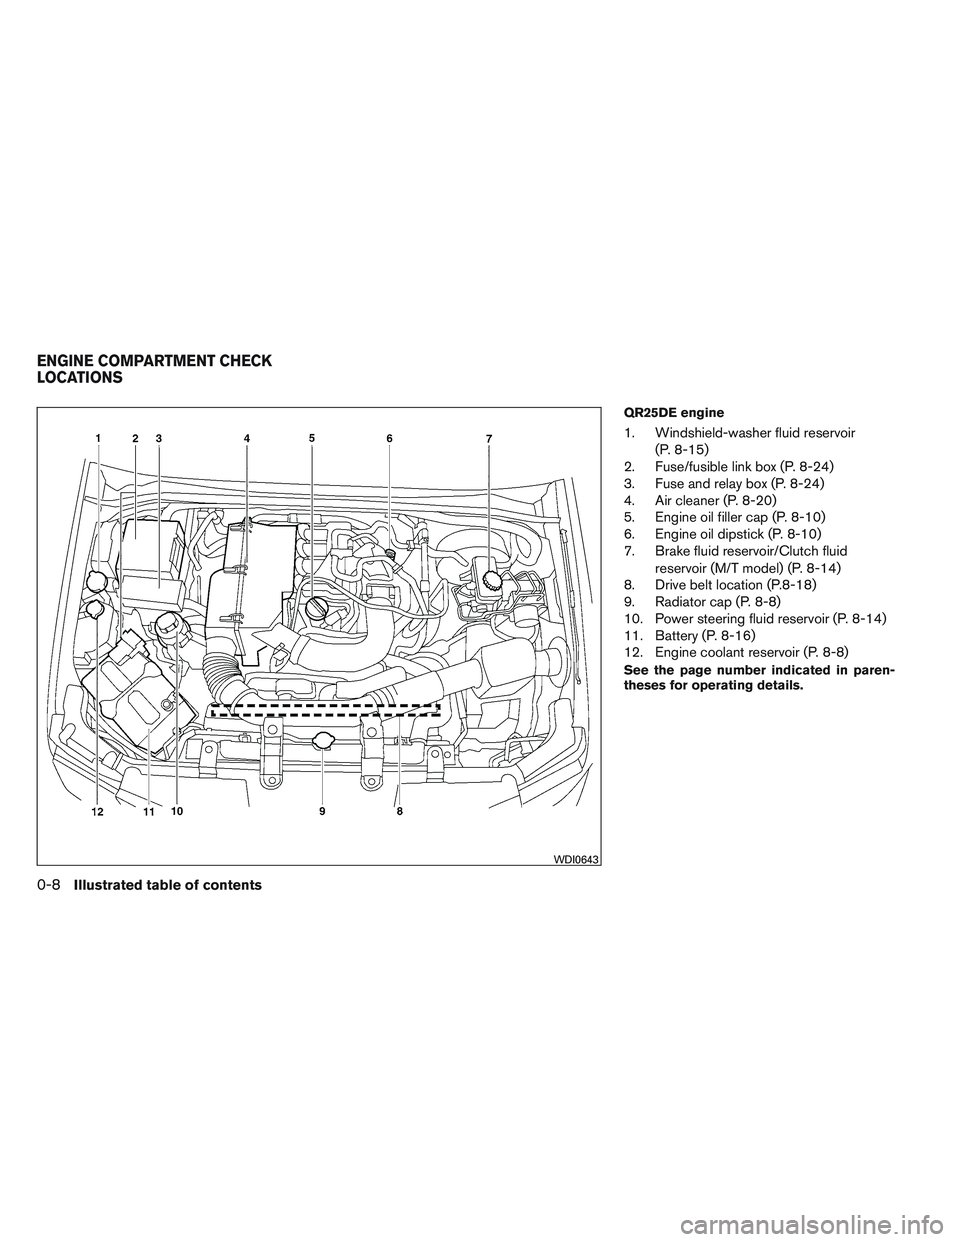 NISSAN FRONTIER 2012  Owner´s Manual QR25DE engine
1. Windshield-washer fluid reservoir(P. 8-15)
2. Fuse/fusible link box (P. 8-24)
3. Fuse and relay box (P. 8-24)
4. Air cleaner (P. 8-20)
5. Engine oil filler cap (P. 8-10)
6. Engine oil